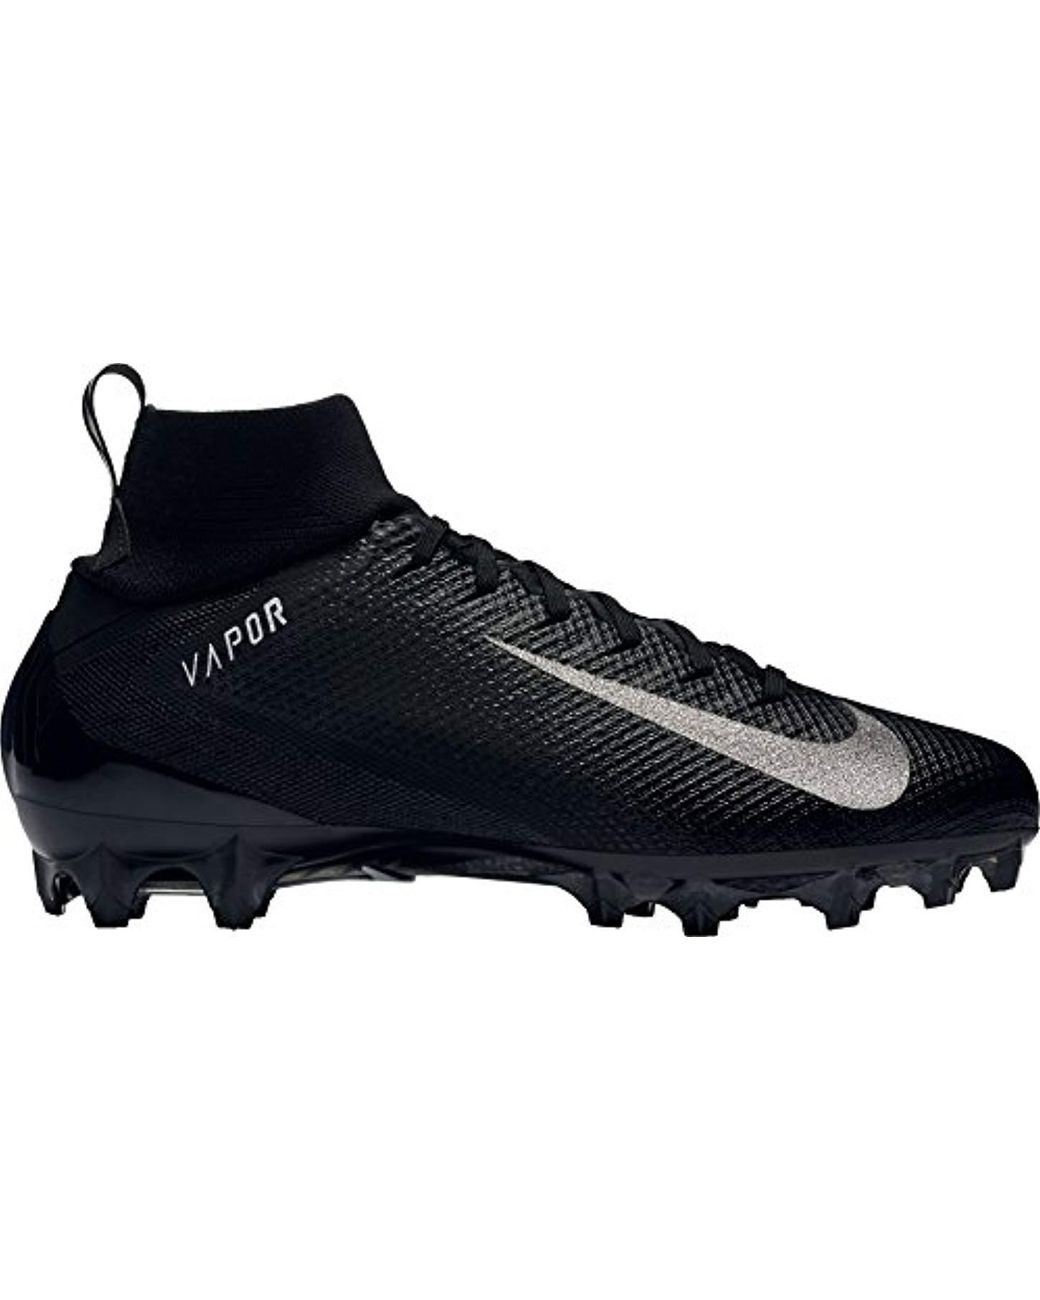 Football Cleat Navy Blue 917165-110 